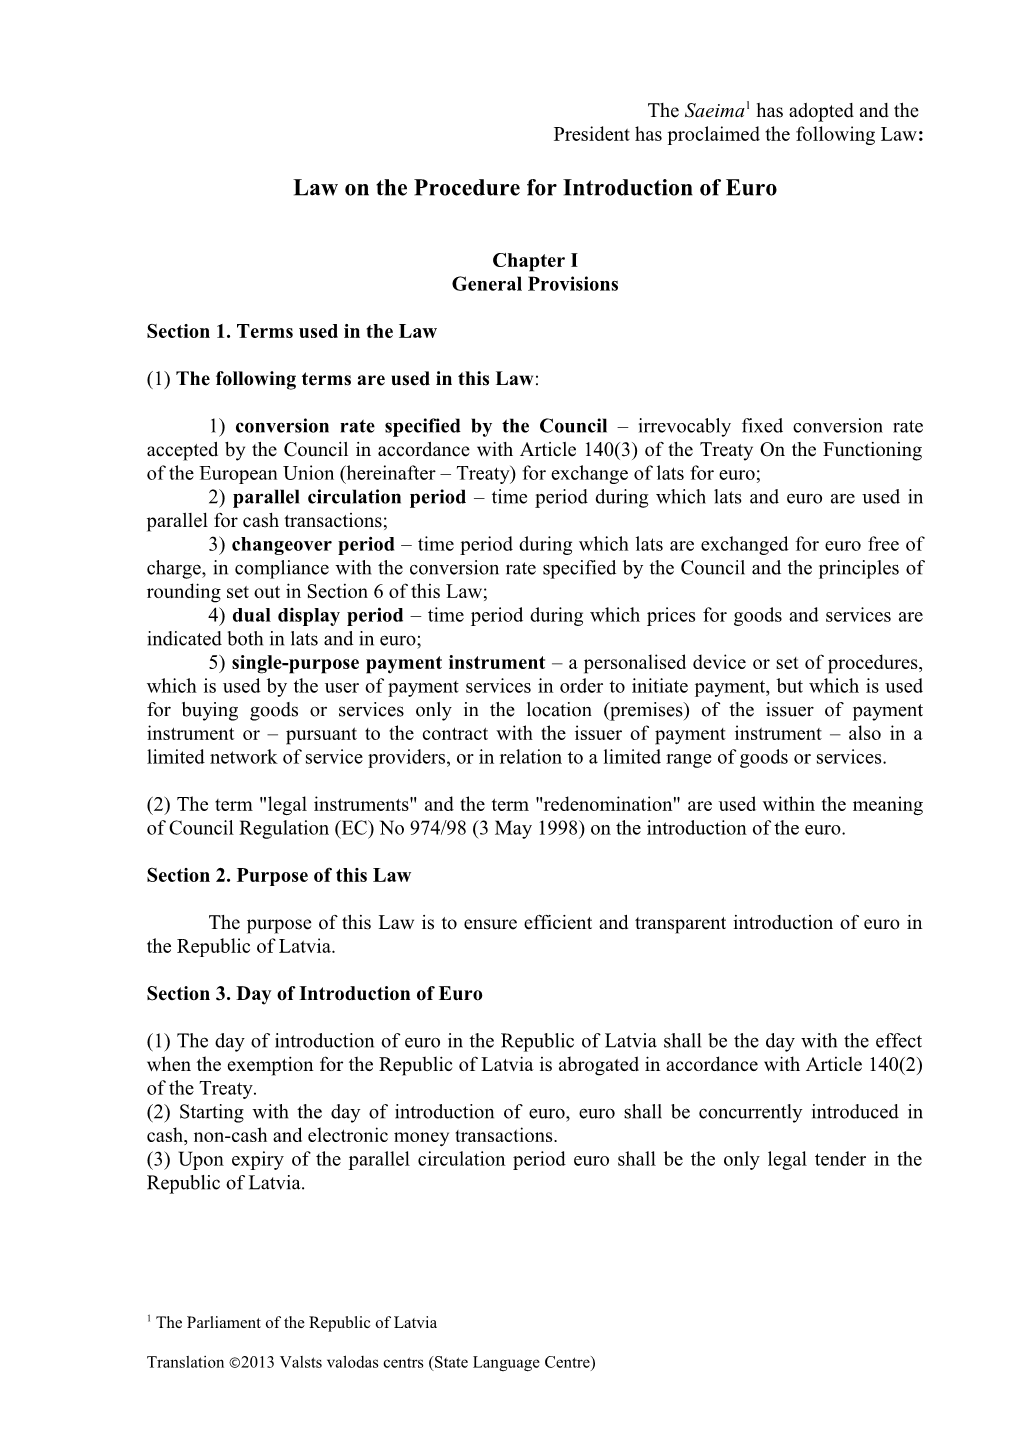 Law on the Procedure for Introduction of Euro